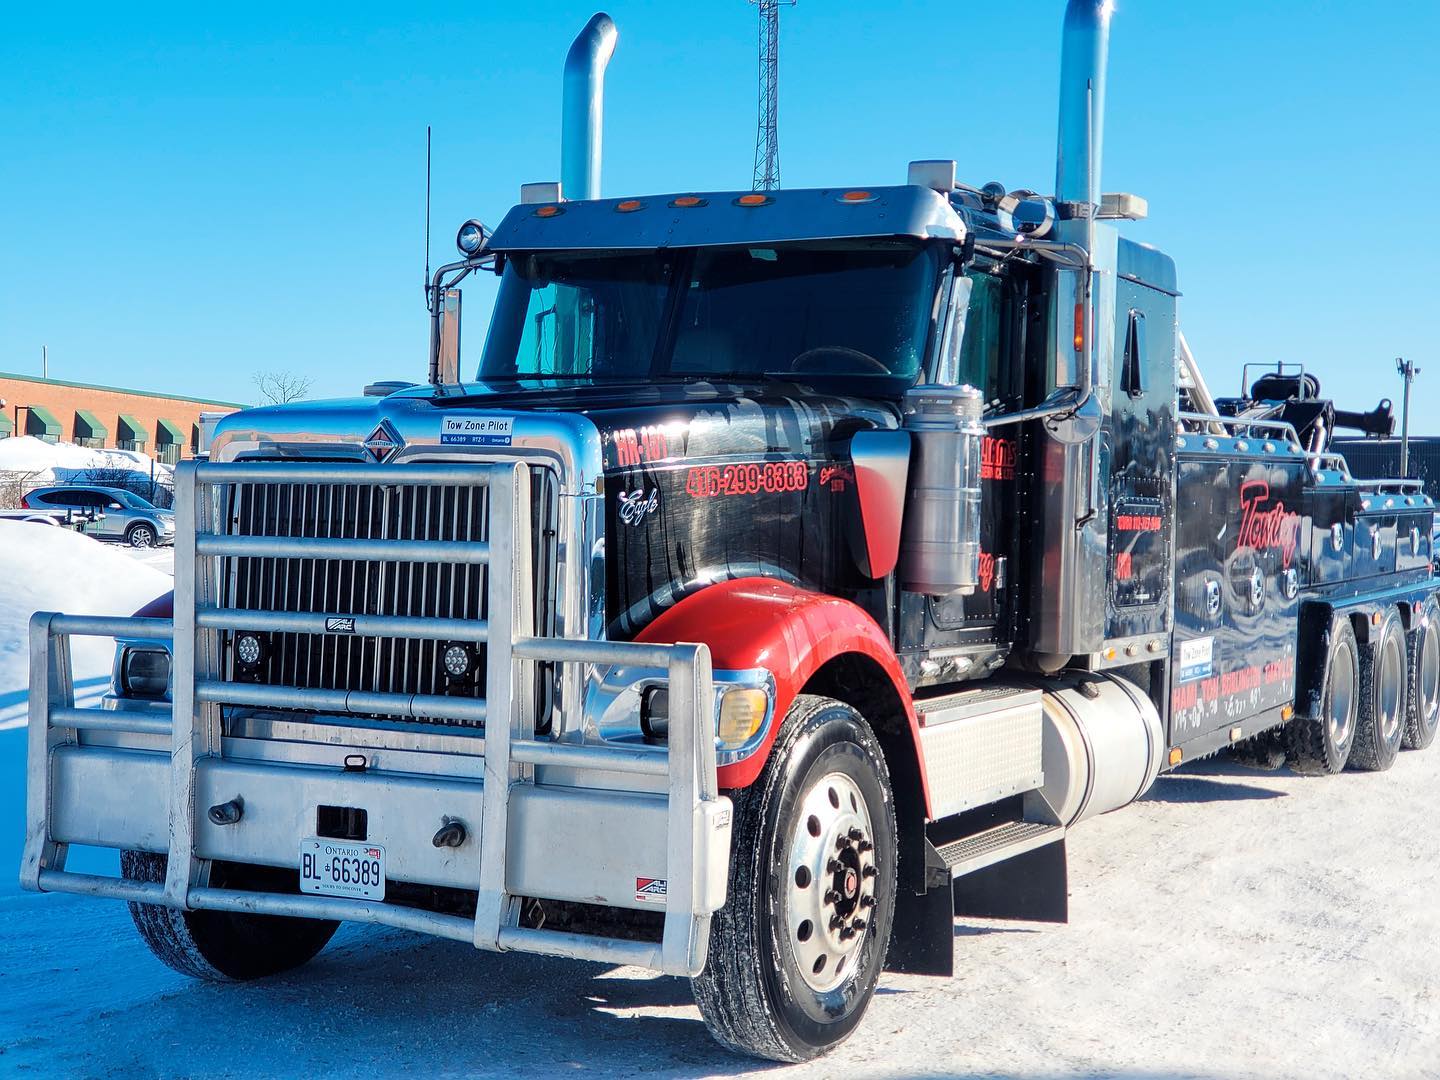 Williams Towing - Corporate Services in Toronto | Williams Towing